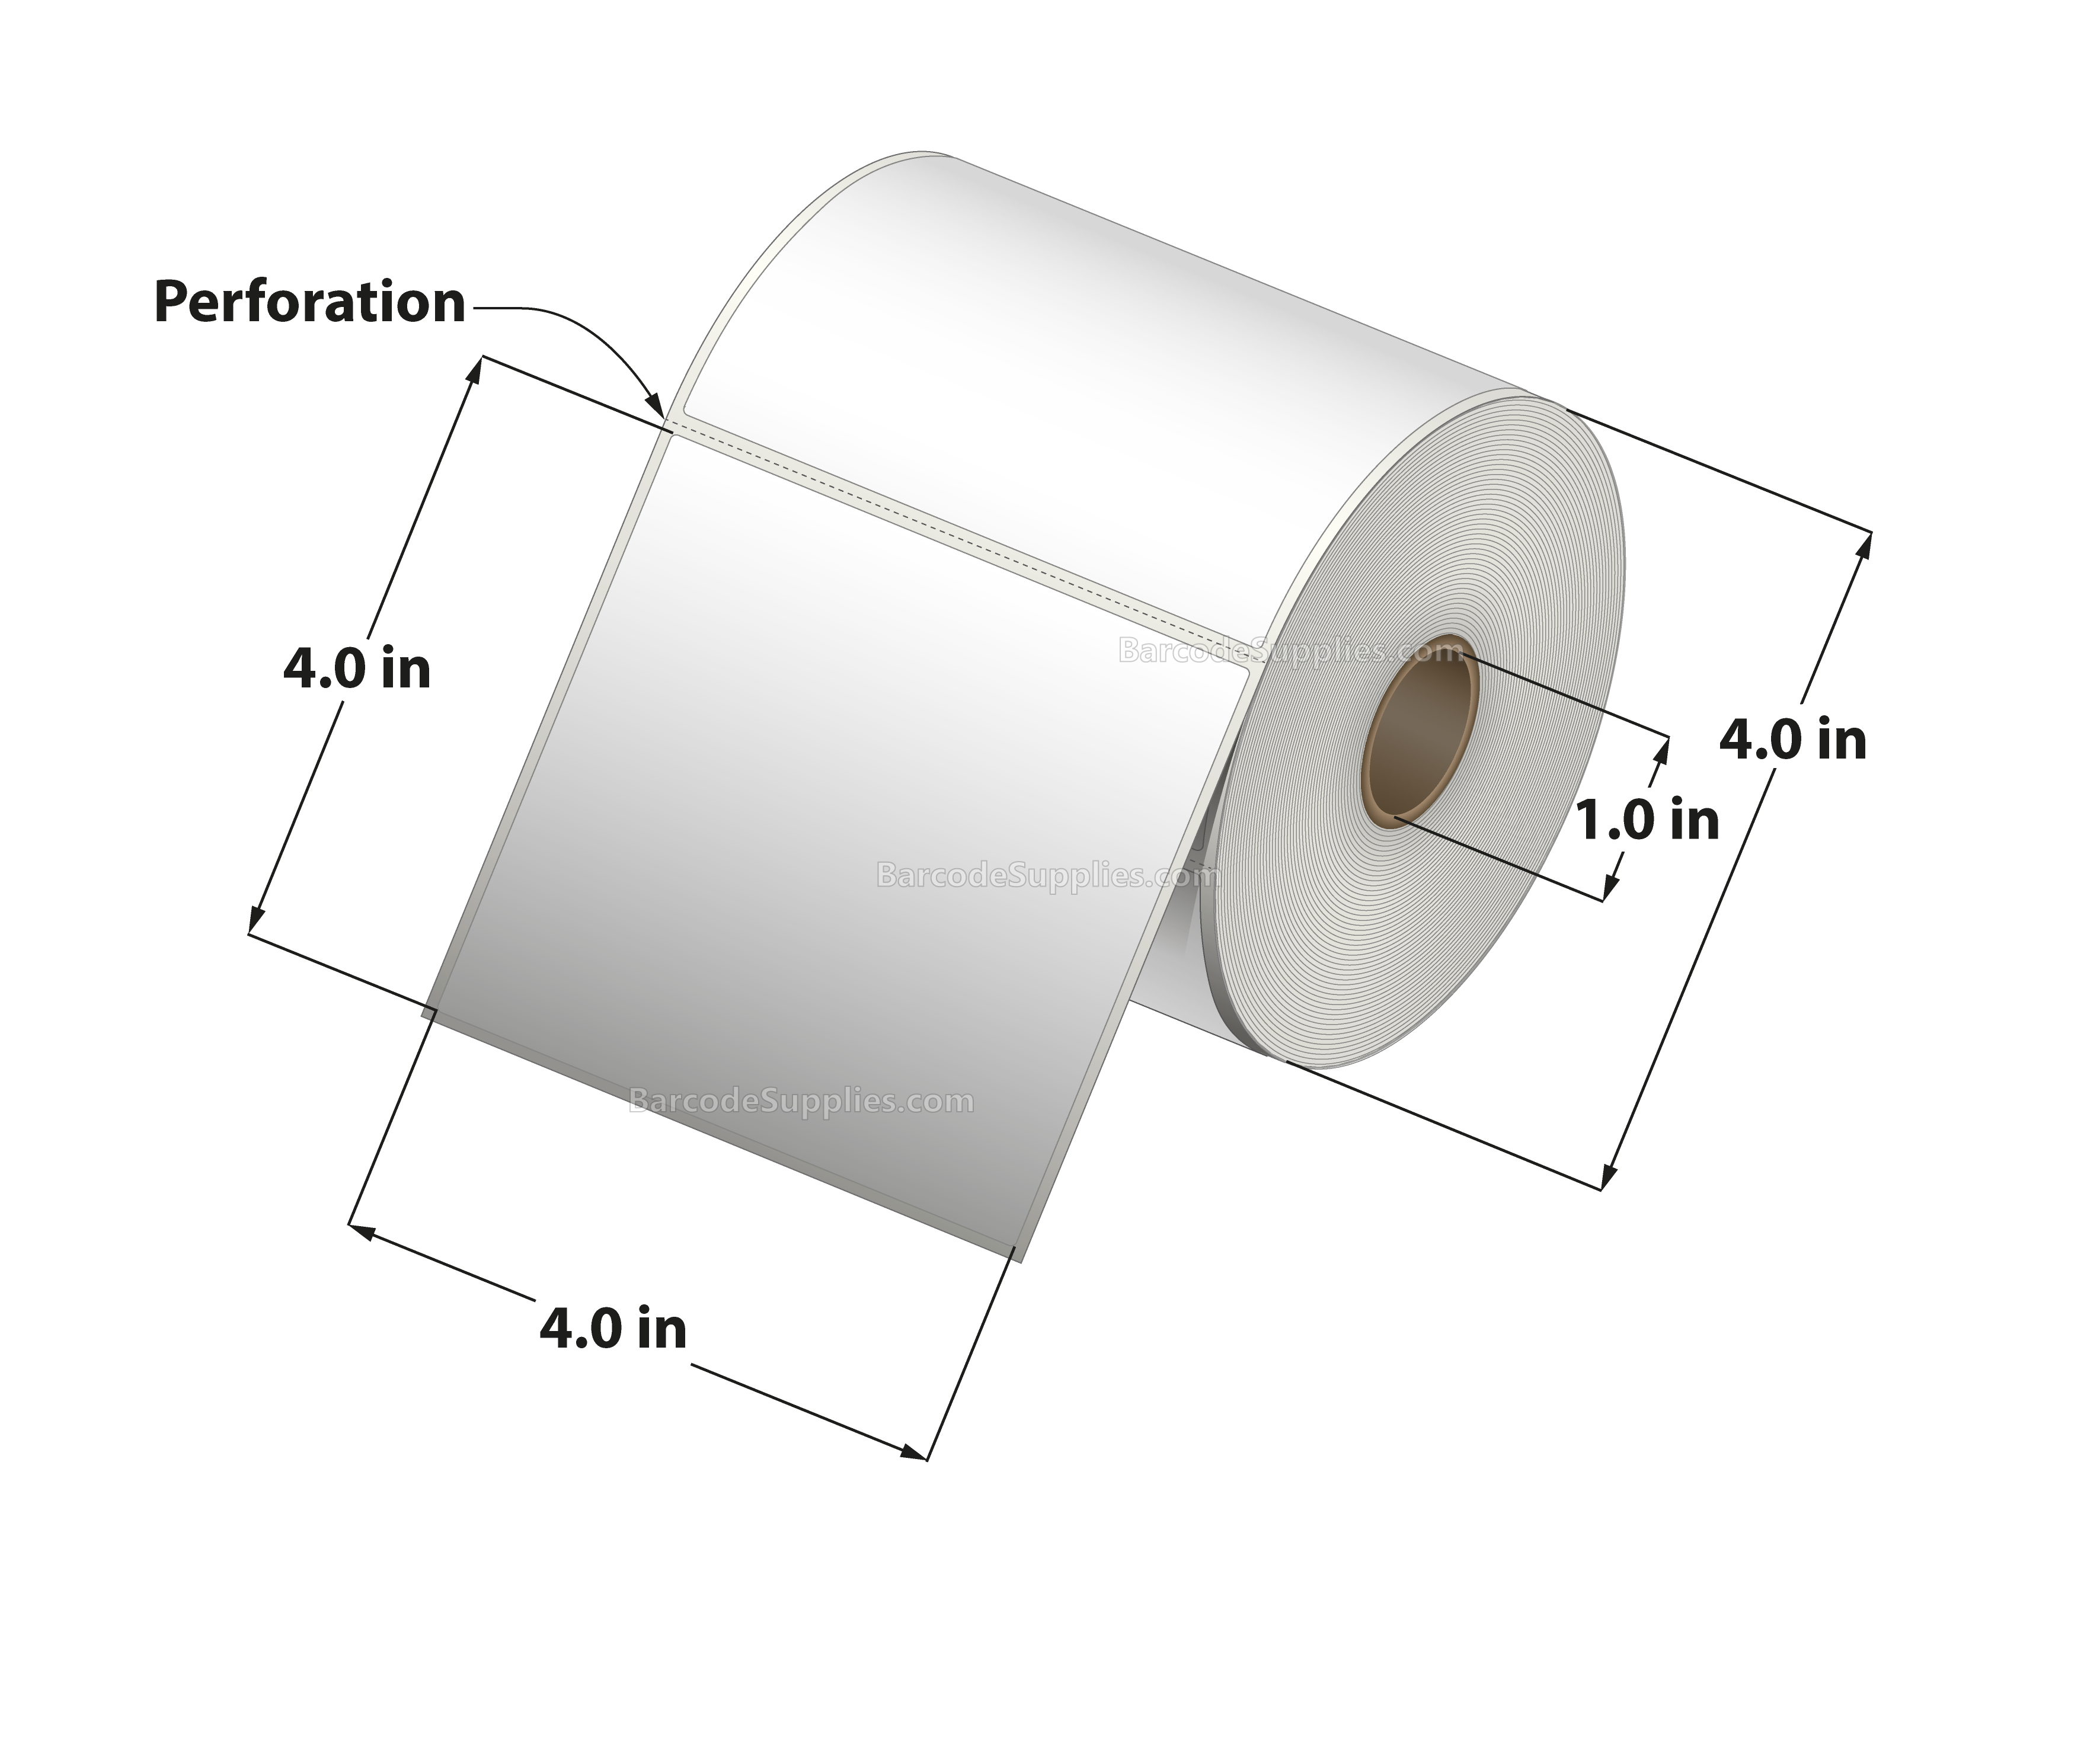 4 x 4 Direct Thermal White Labels With Acrylic Adhesive - Perforated - 380 Labels Per Roll - Carton Of 12 Rolls - 4560 Labels Total - MPN: RD-4-4-380-1 - BarcodeSource, Inc.